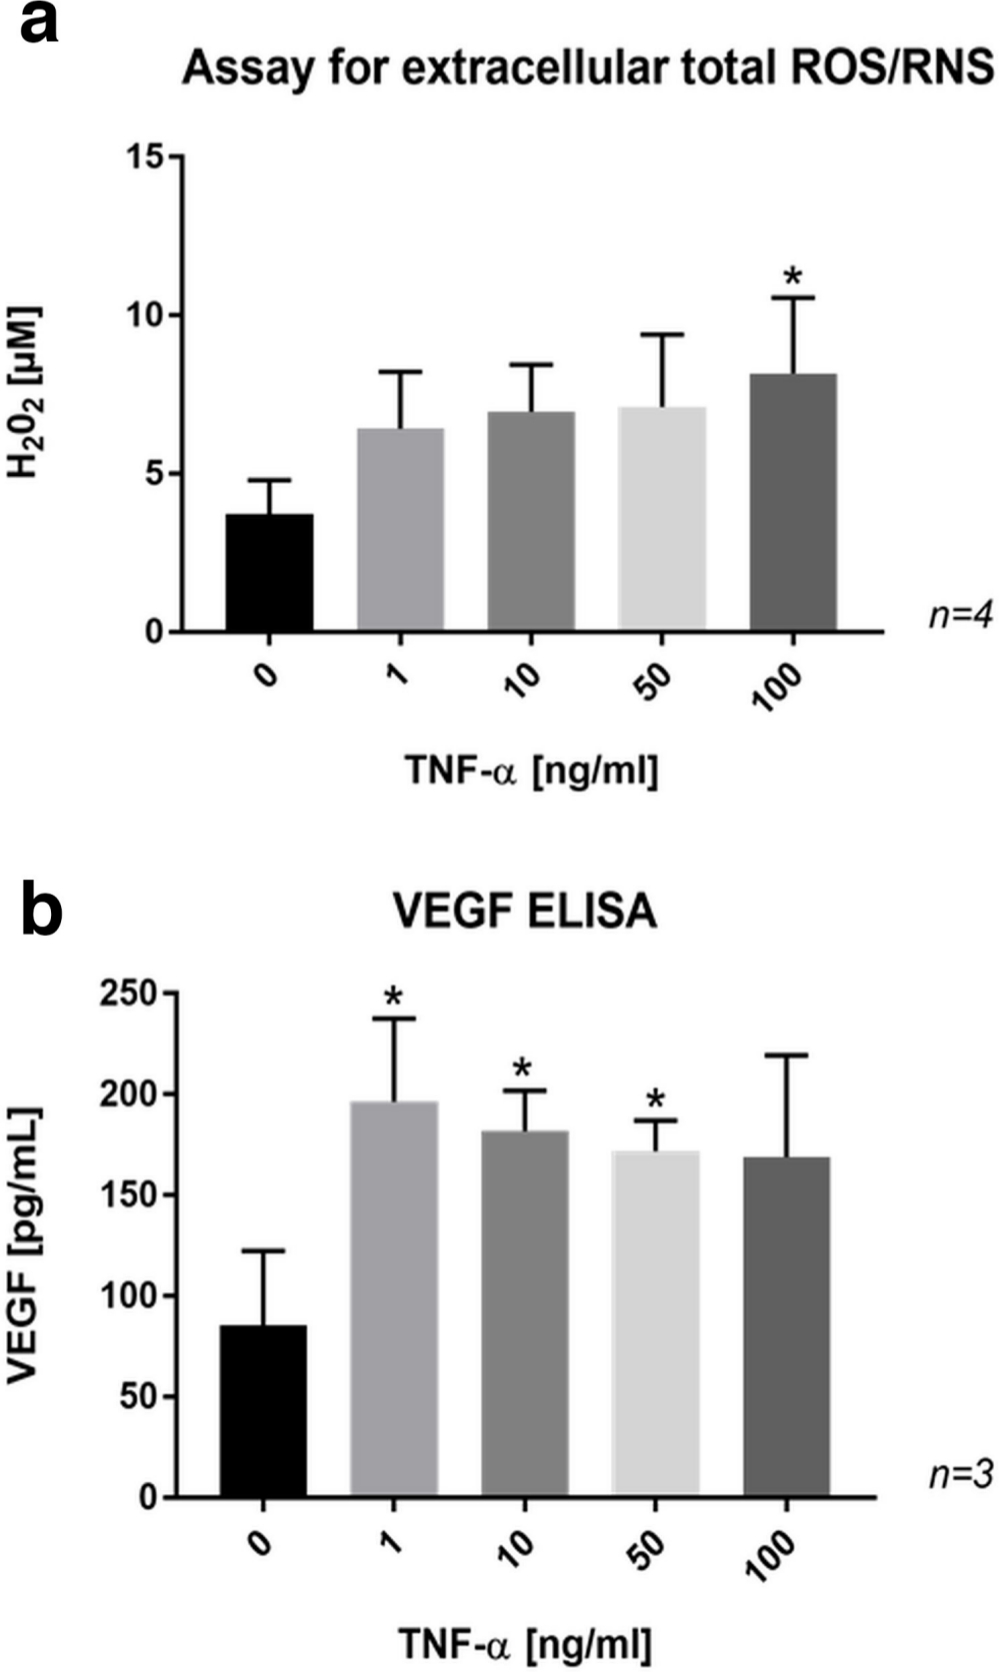 Fig. 8 
            a) Bar chart showing a dose-dependent increase in the formation of extracellular reactive oxygen and nitrogen species (ROS/RNS) by SaOs-2 cells treated with tumour necrosis factor-alpha (TNF-α) for 24 hours. b) Bar chart showing enhanced release of vascular endothelial growth factor (VEGF) in the culture medium of SaOs-2 cells treated with TNF-α for 24 hours. Data are presented as the mean ± SD. *p < 0.05 versus control group, evaluated by one-way analysis of variance followed by post-hoc analysis using Dunnett’s multiple comparisons test. ELISA, enzyme-linked immunosorbent assay; H2O2, hydrogen peroxide.
          